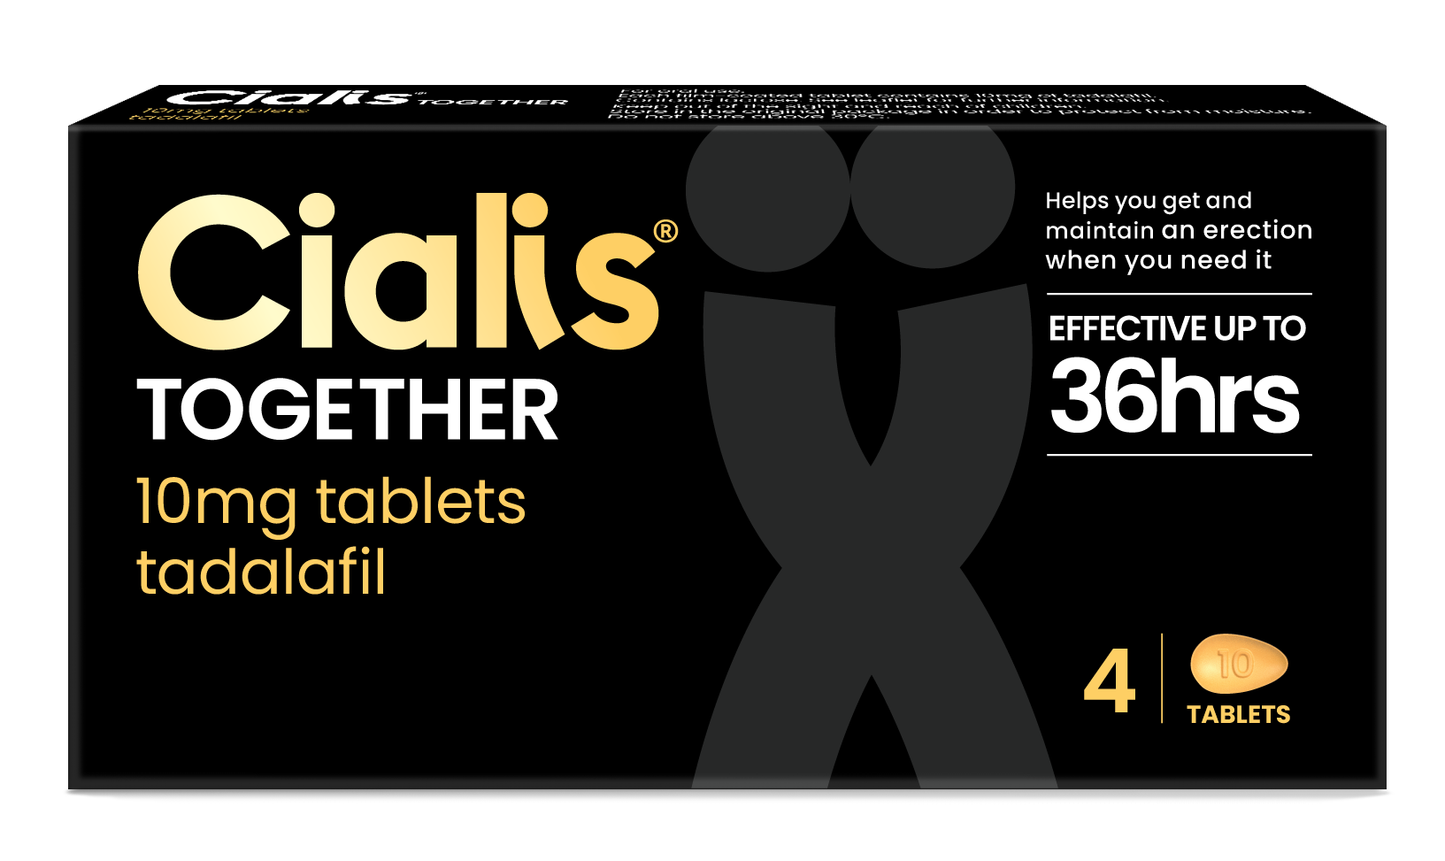 Cialis® Together 10mg tablets